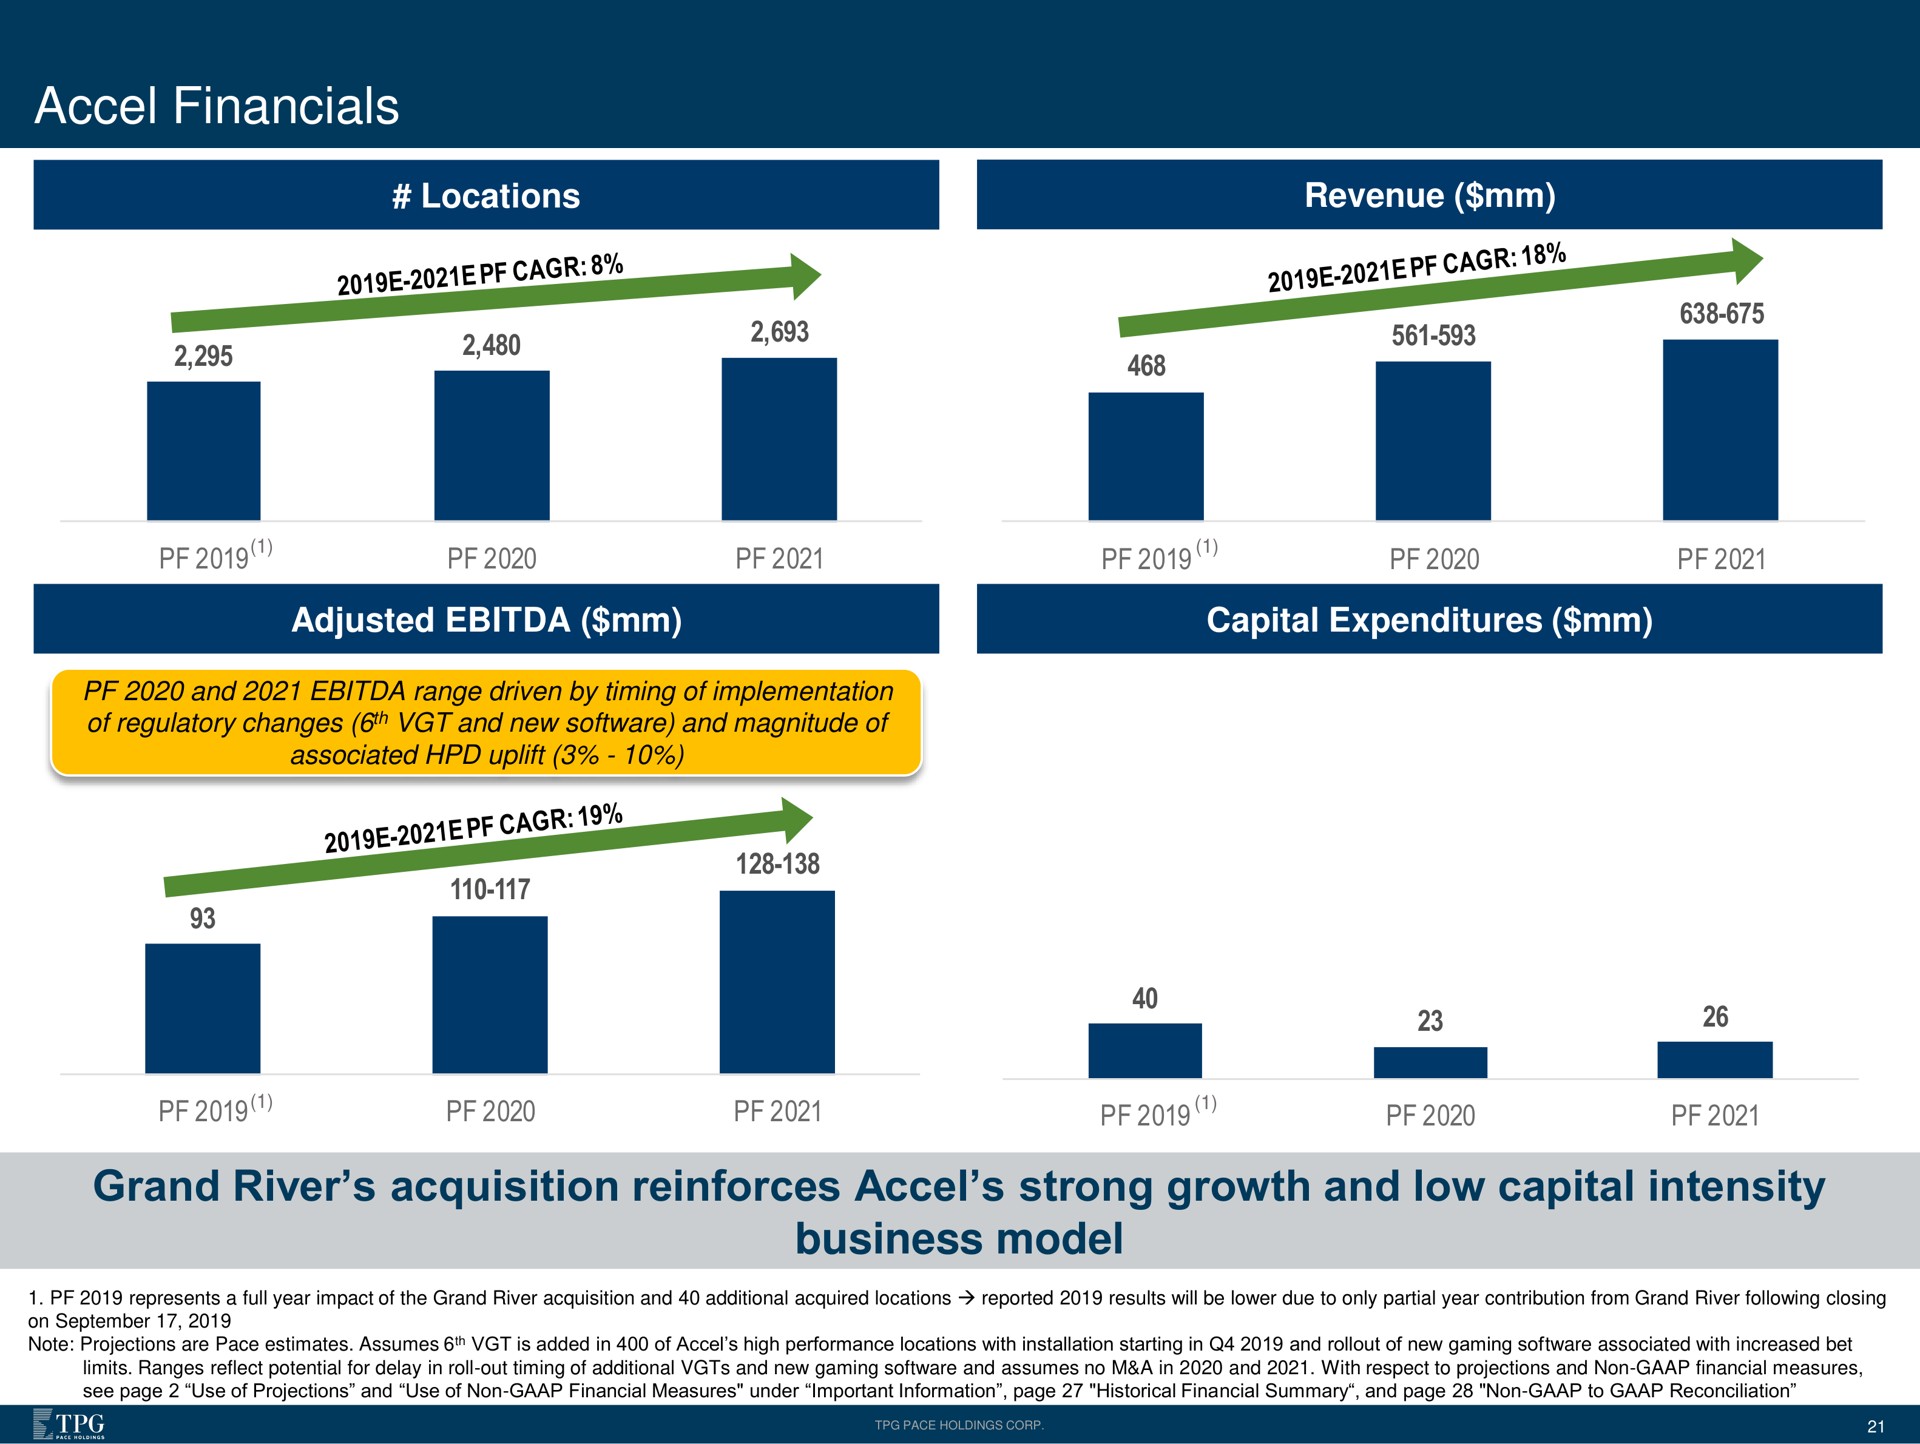 grand river acquisition reinforces strong growth and low capital intensity business model | Accel Entertaiment